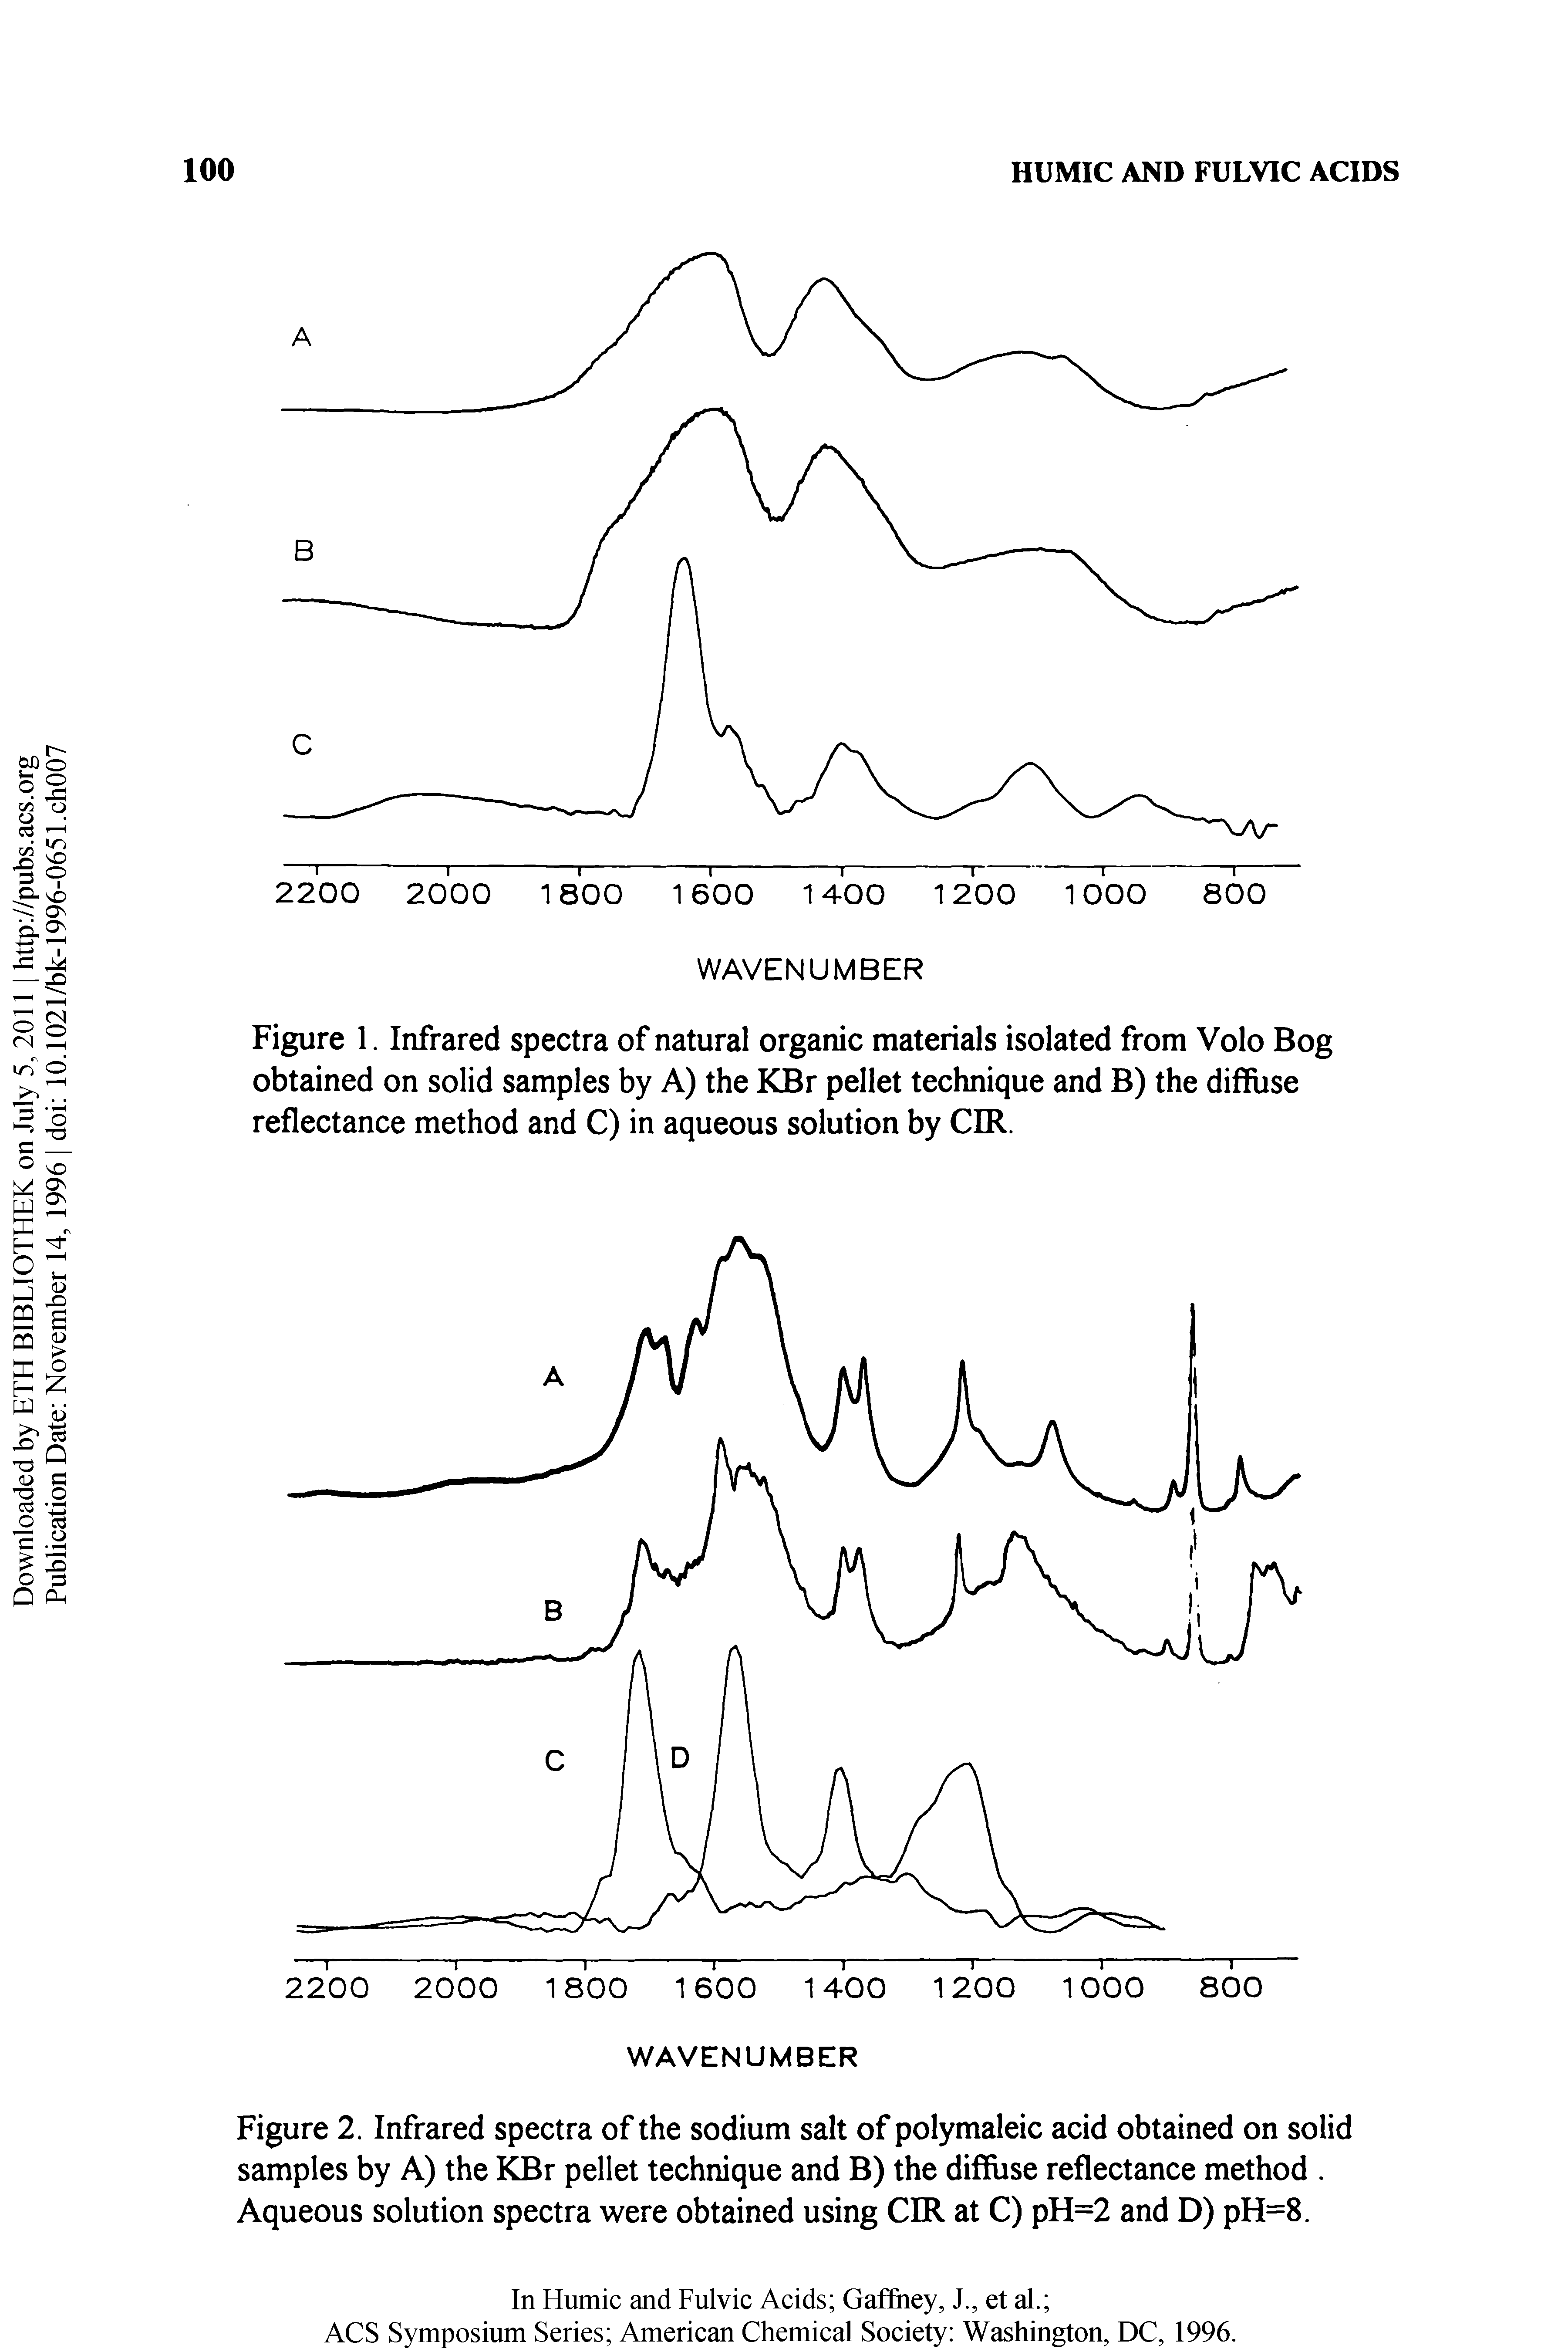 Figure 2. Infrared spectra of the sodium salt of polymaleic acid obtained on solid samples by A) the I r pellet technique and B) the diffuse reflectance method. Aqueous solution spectra were obtained using CIR at C) pH=2 and D) pH=8.